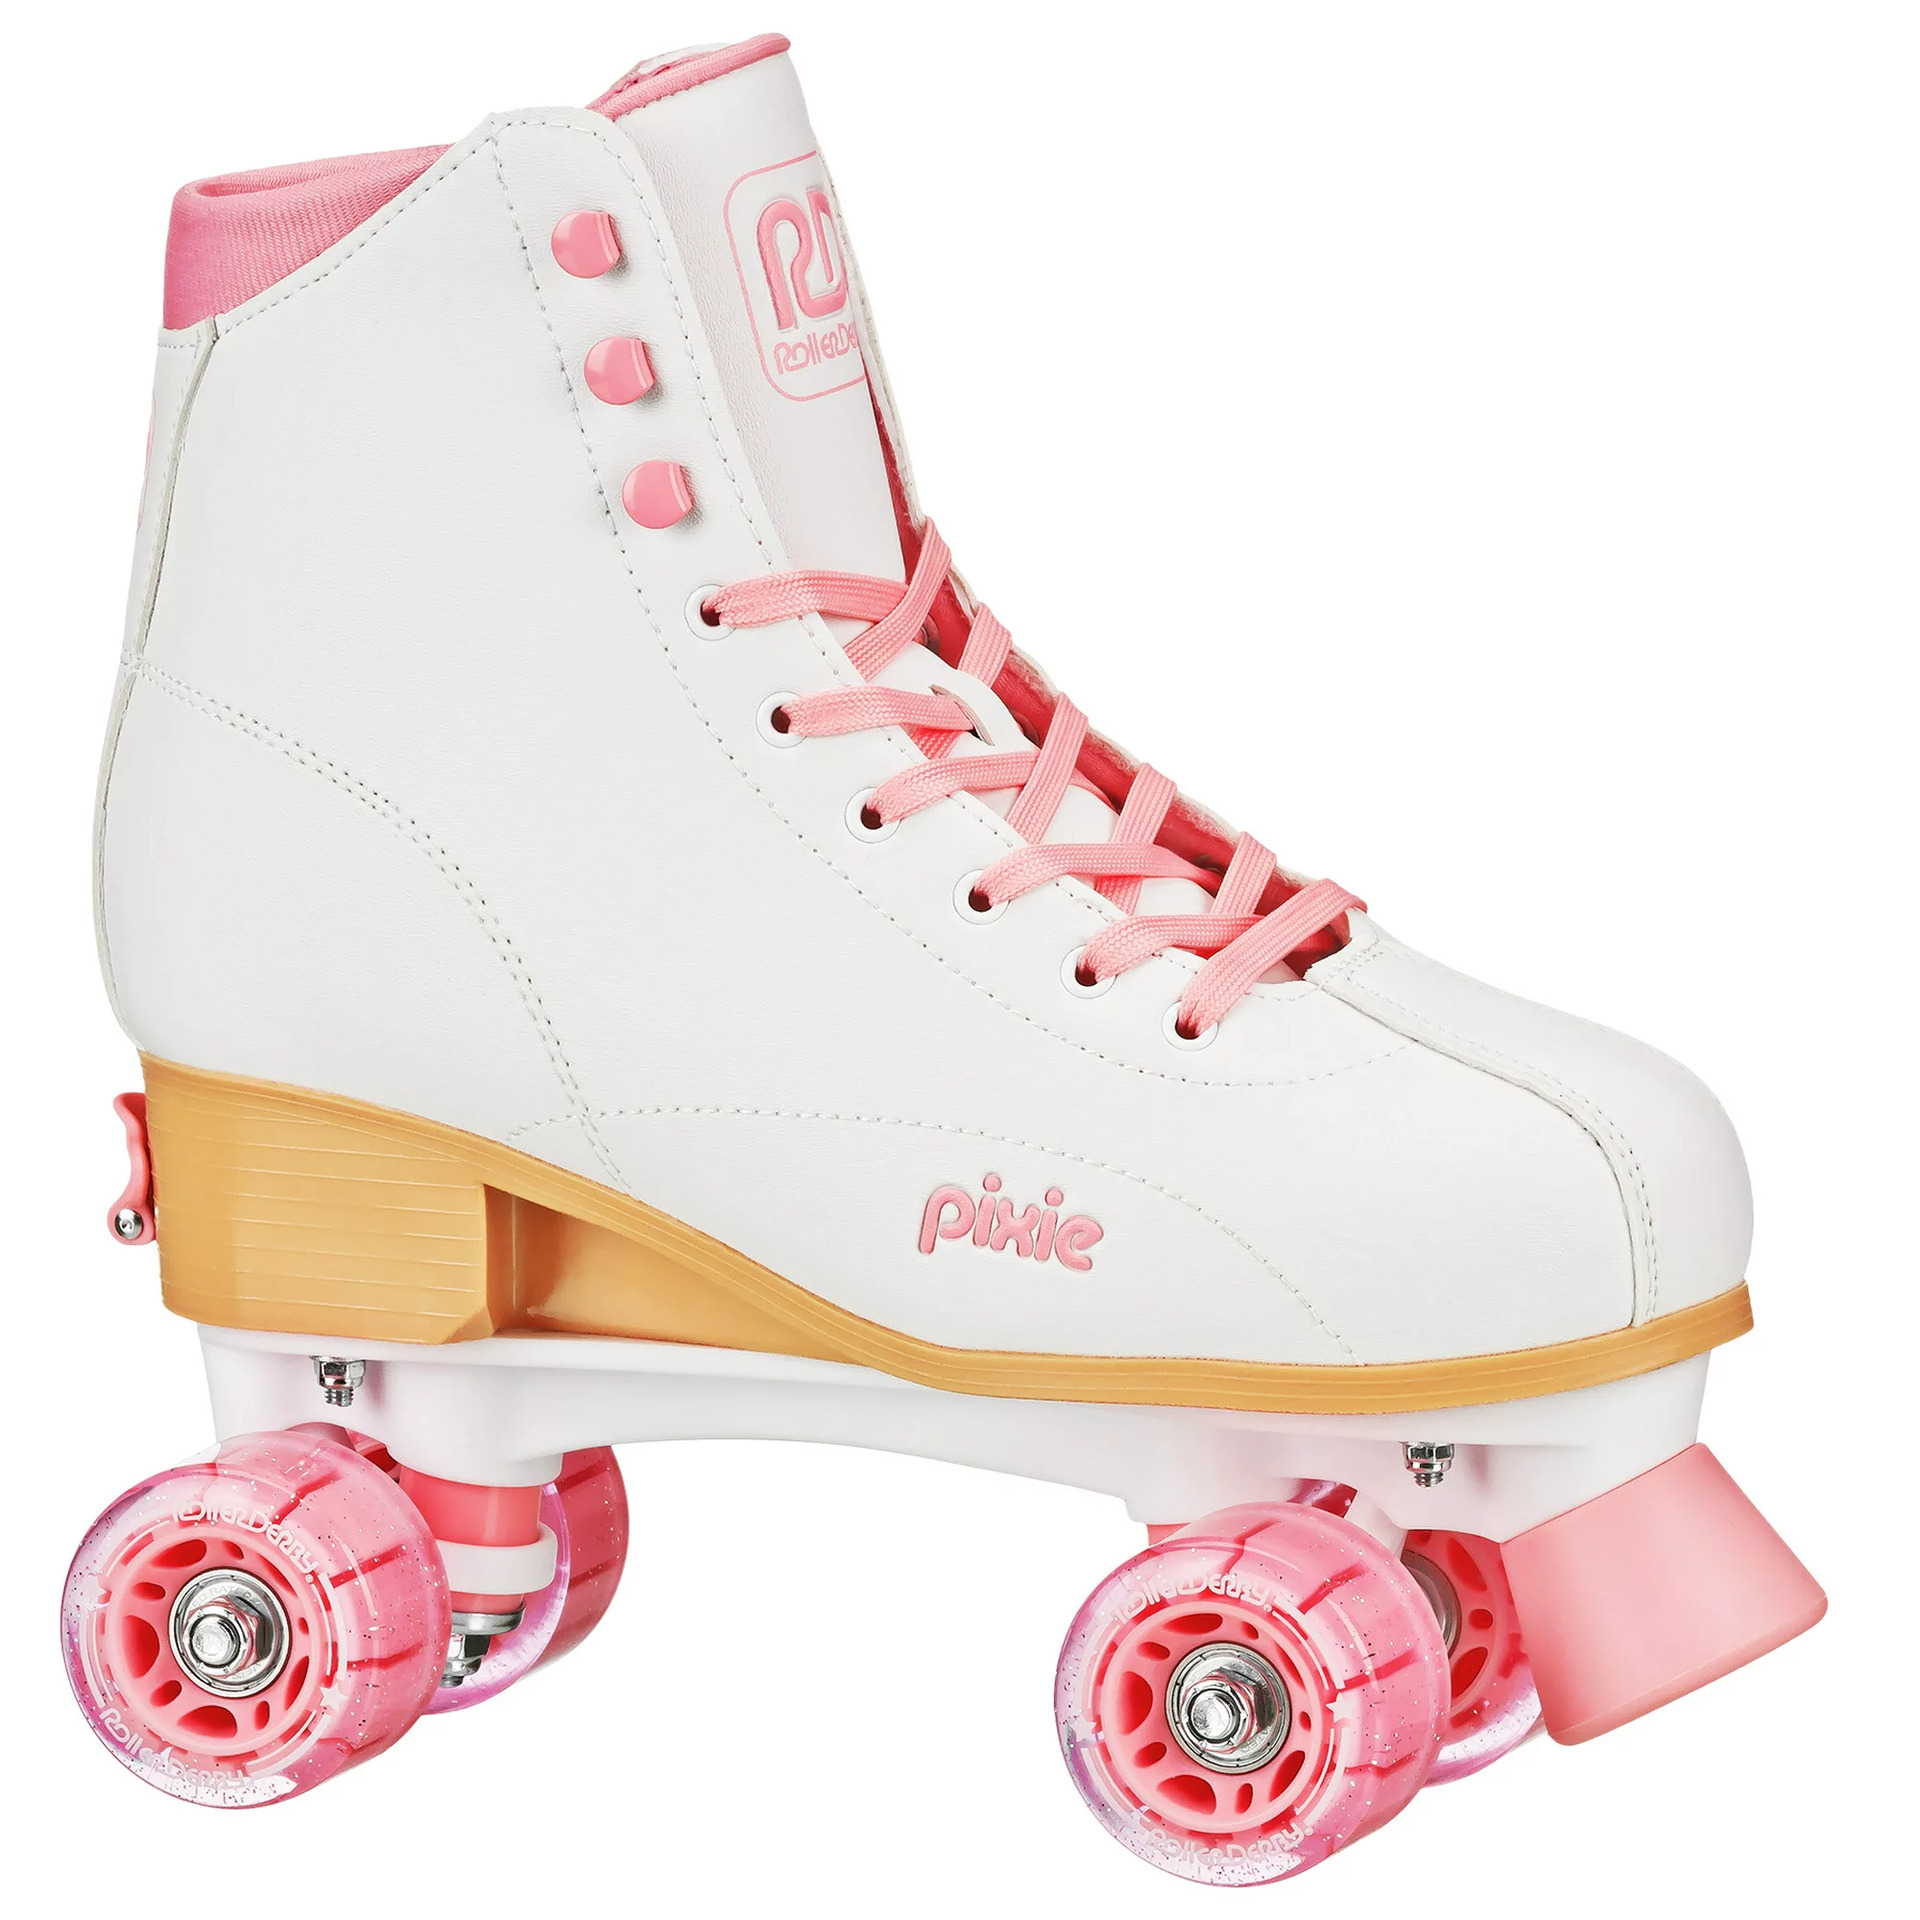 Roller Skating Accessories, Equipment and Supplies